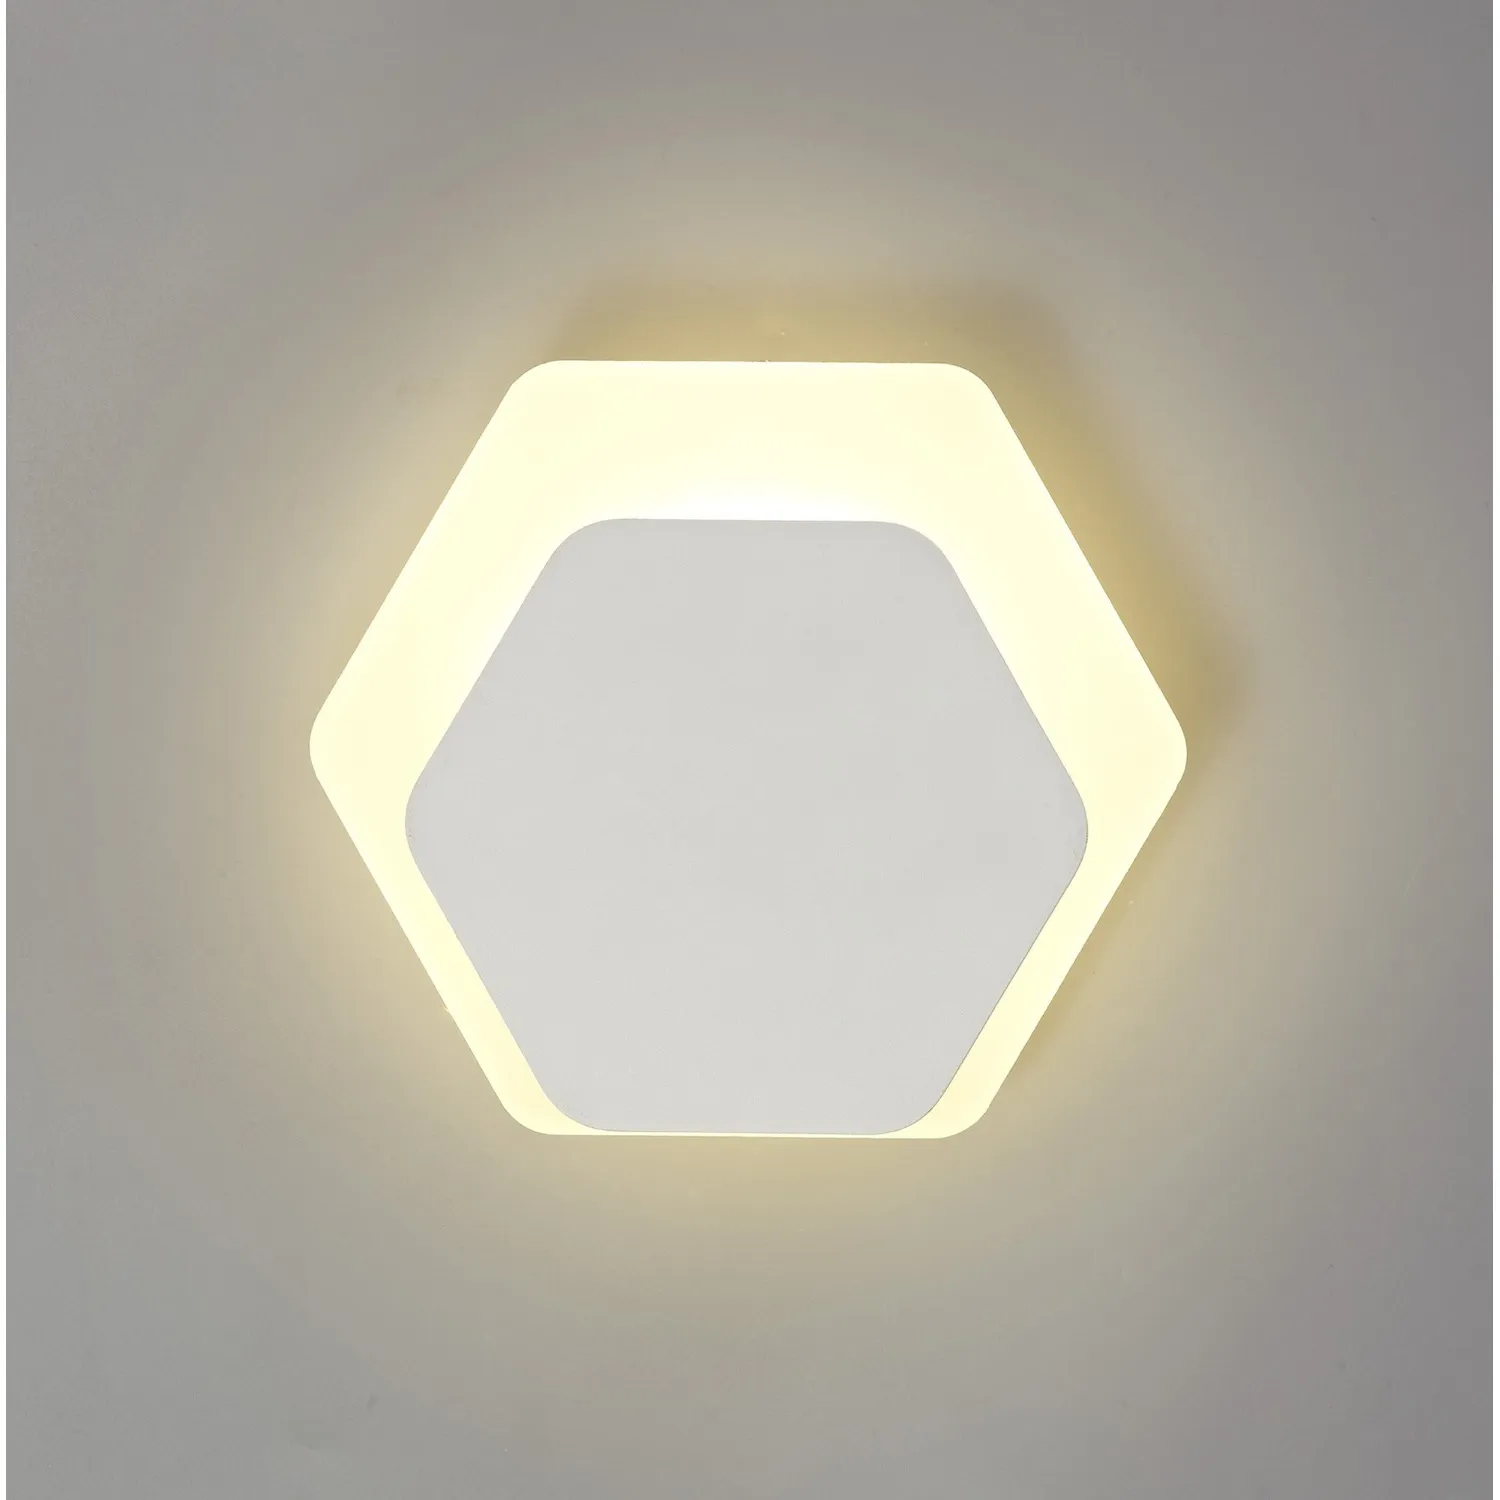 Edgware Magnetic Base Wall Lamp, 12W LED 3000K 498lm, 15 19cm Horizontal Hexagonal Bottom Offset, Sand White Acrylic Frosted Diffuser